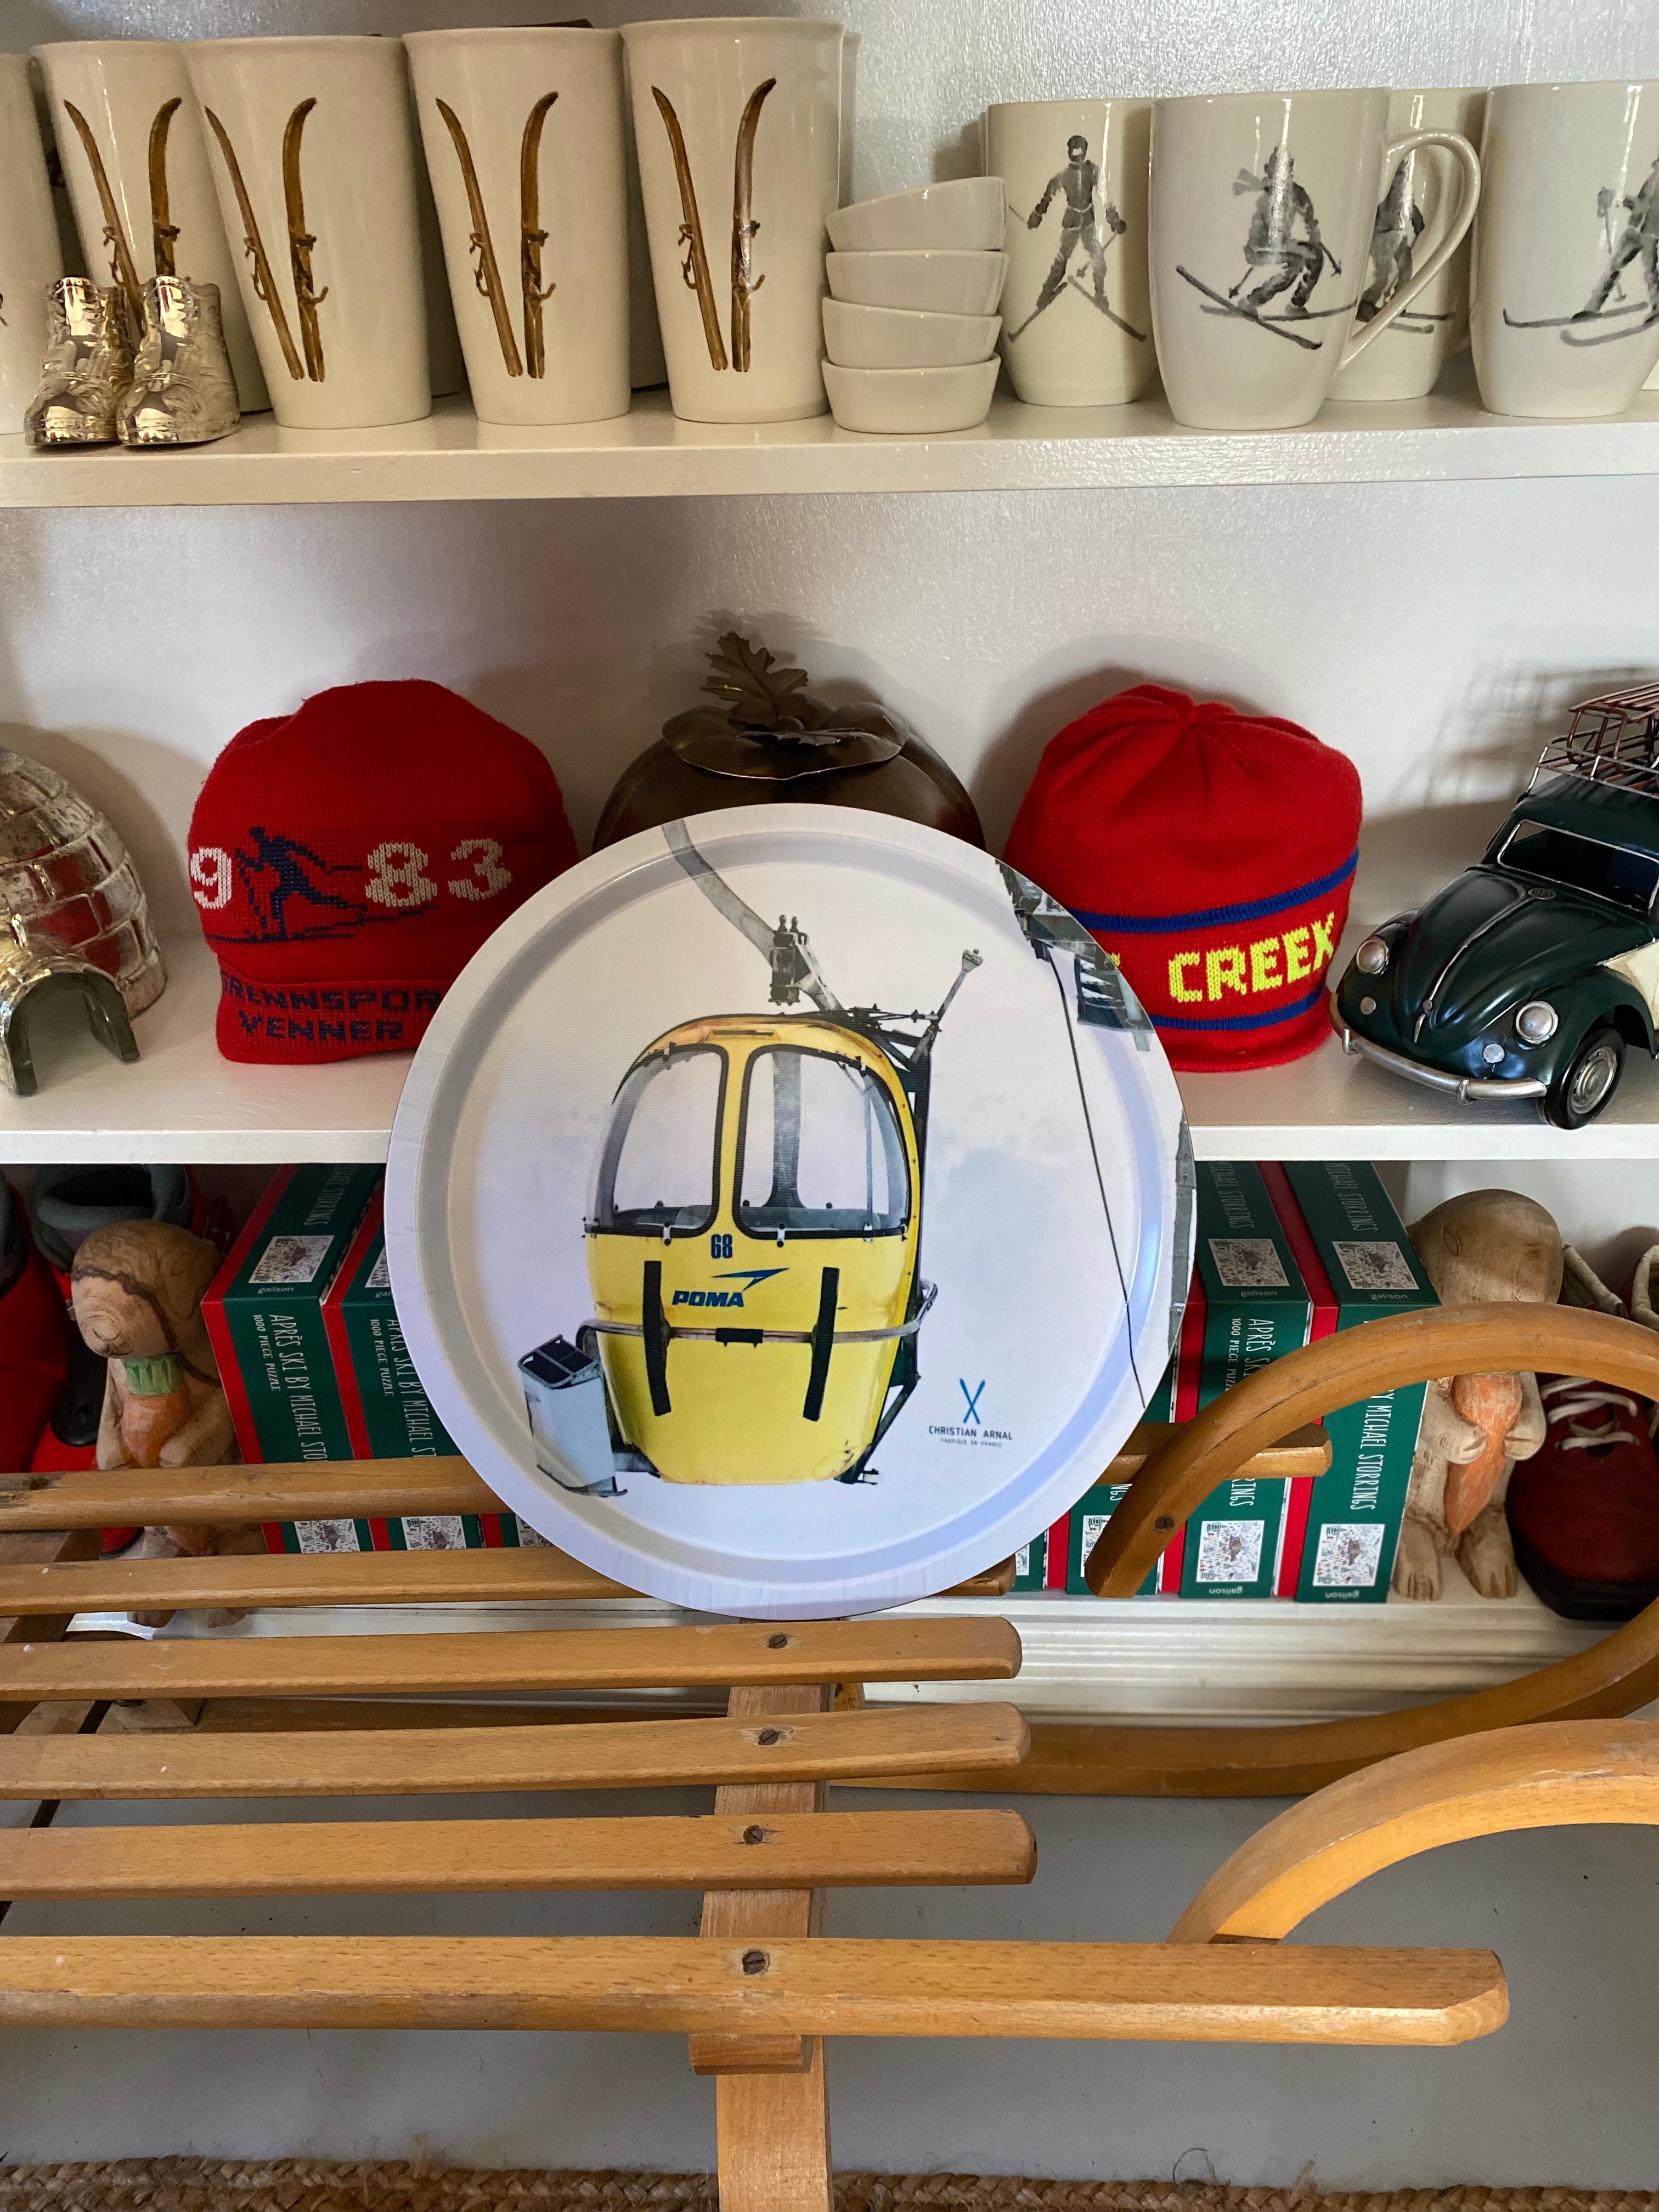 Photo of a Yellow Vintage Gondola printed onto a Round White Serving Tray, resting on a vintage wooden sled in front of a white bookshelf filled with snow related products